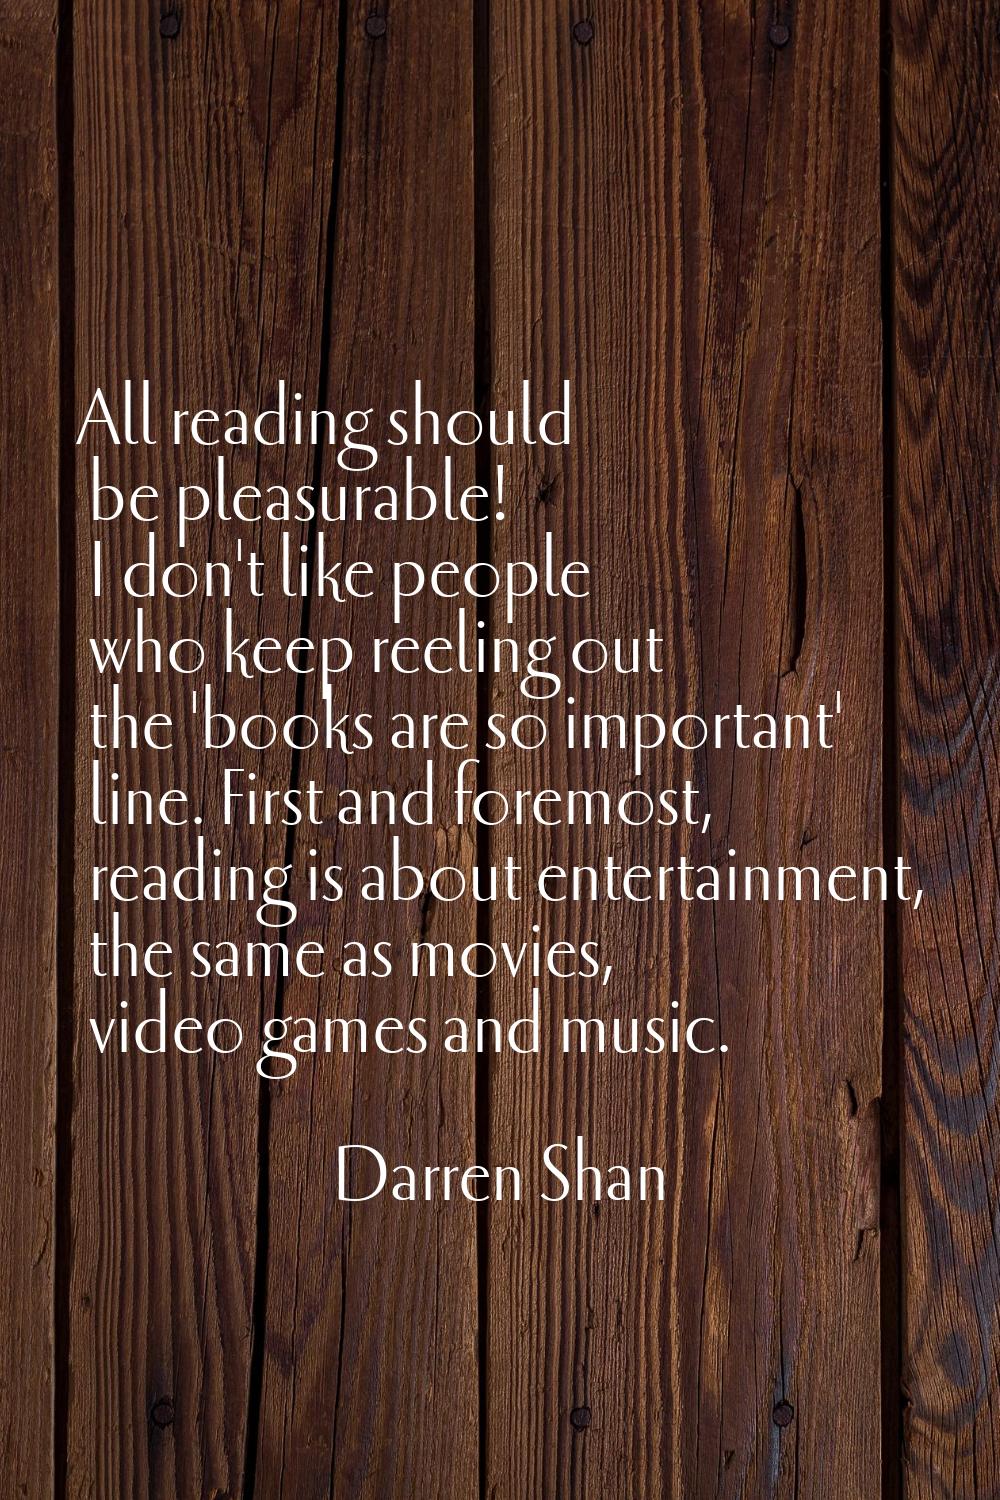 All reading should be pleasurable! I don't like people who keep reeling out the 'books are so impor